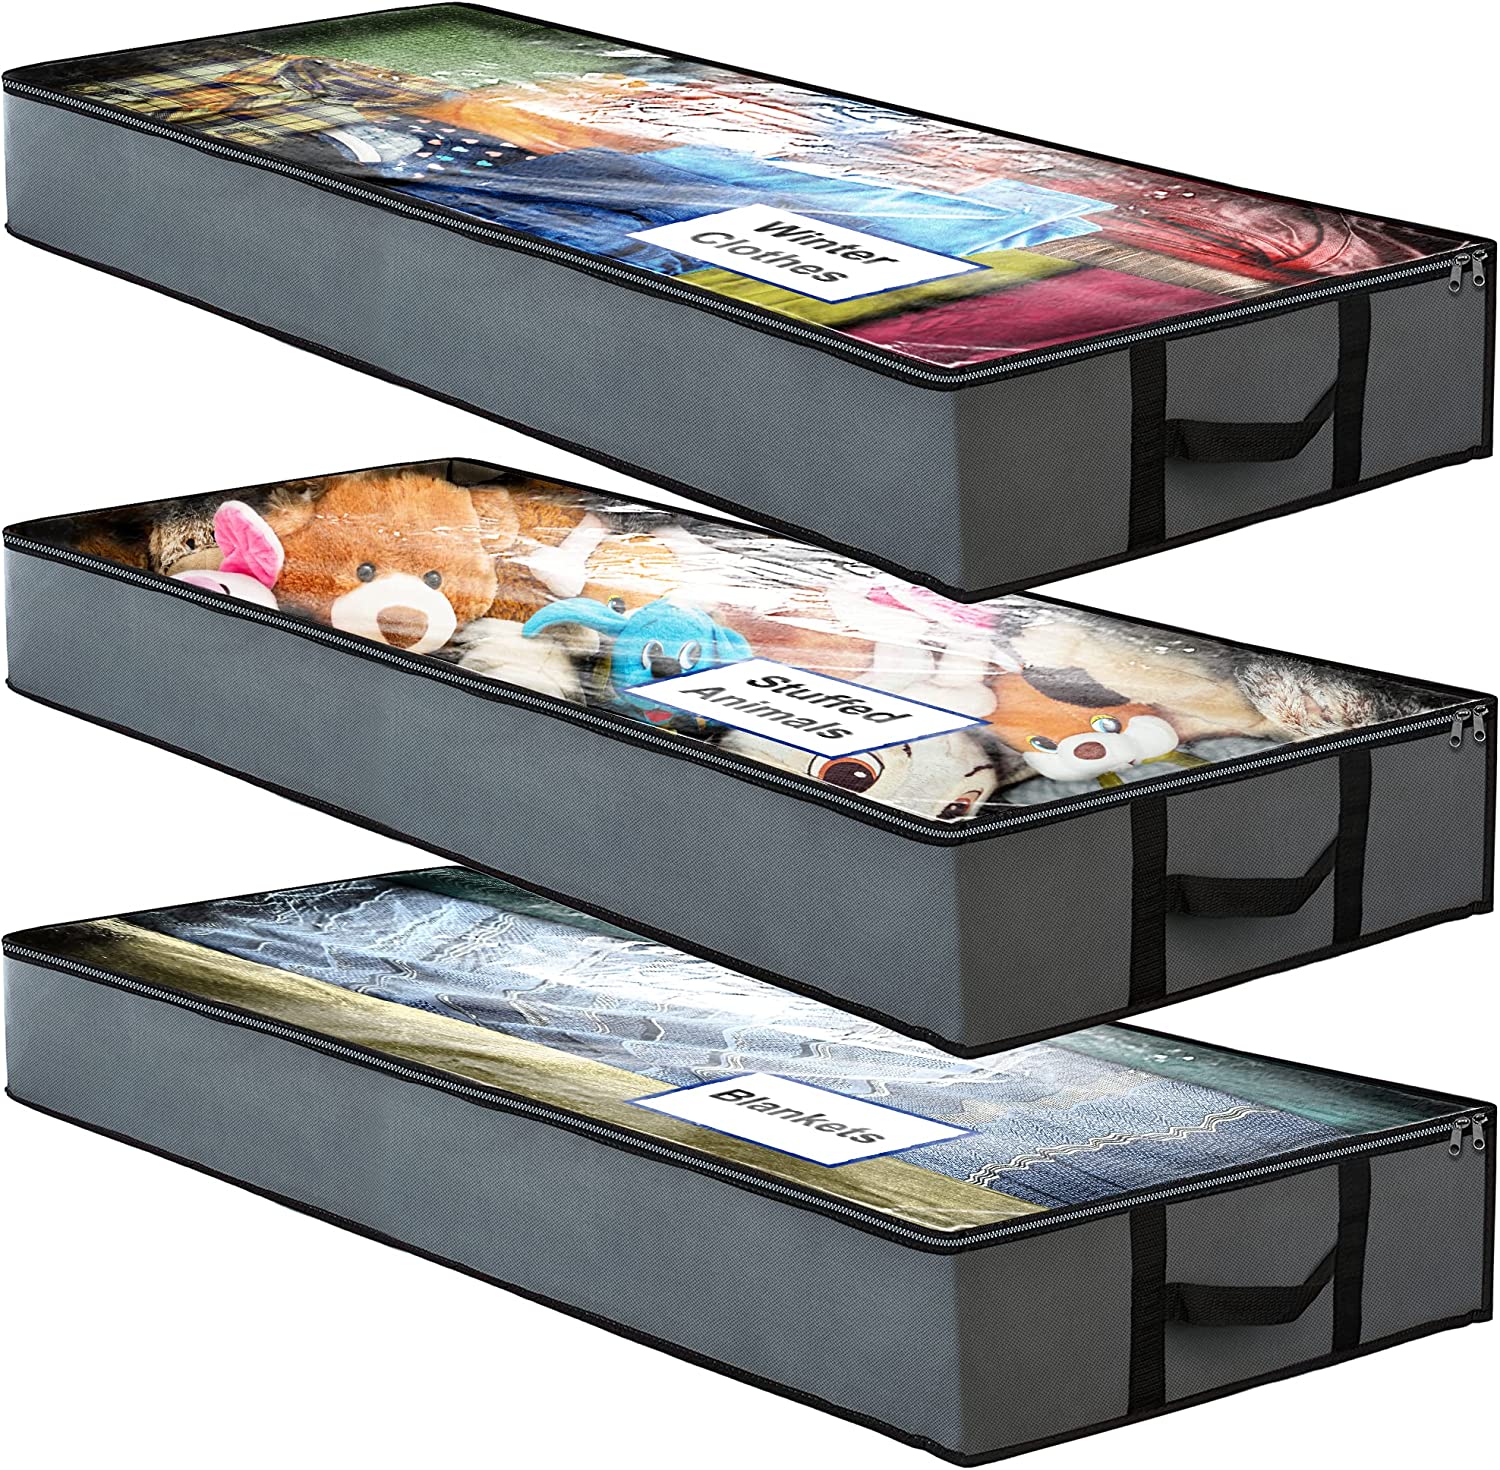 NestNeatly Clutter-Free Zippered Underbed Storage, 3-Pack